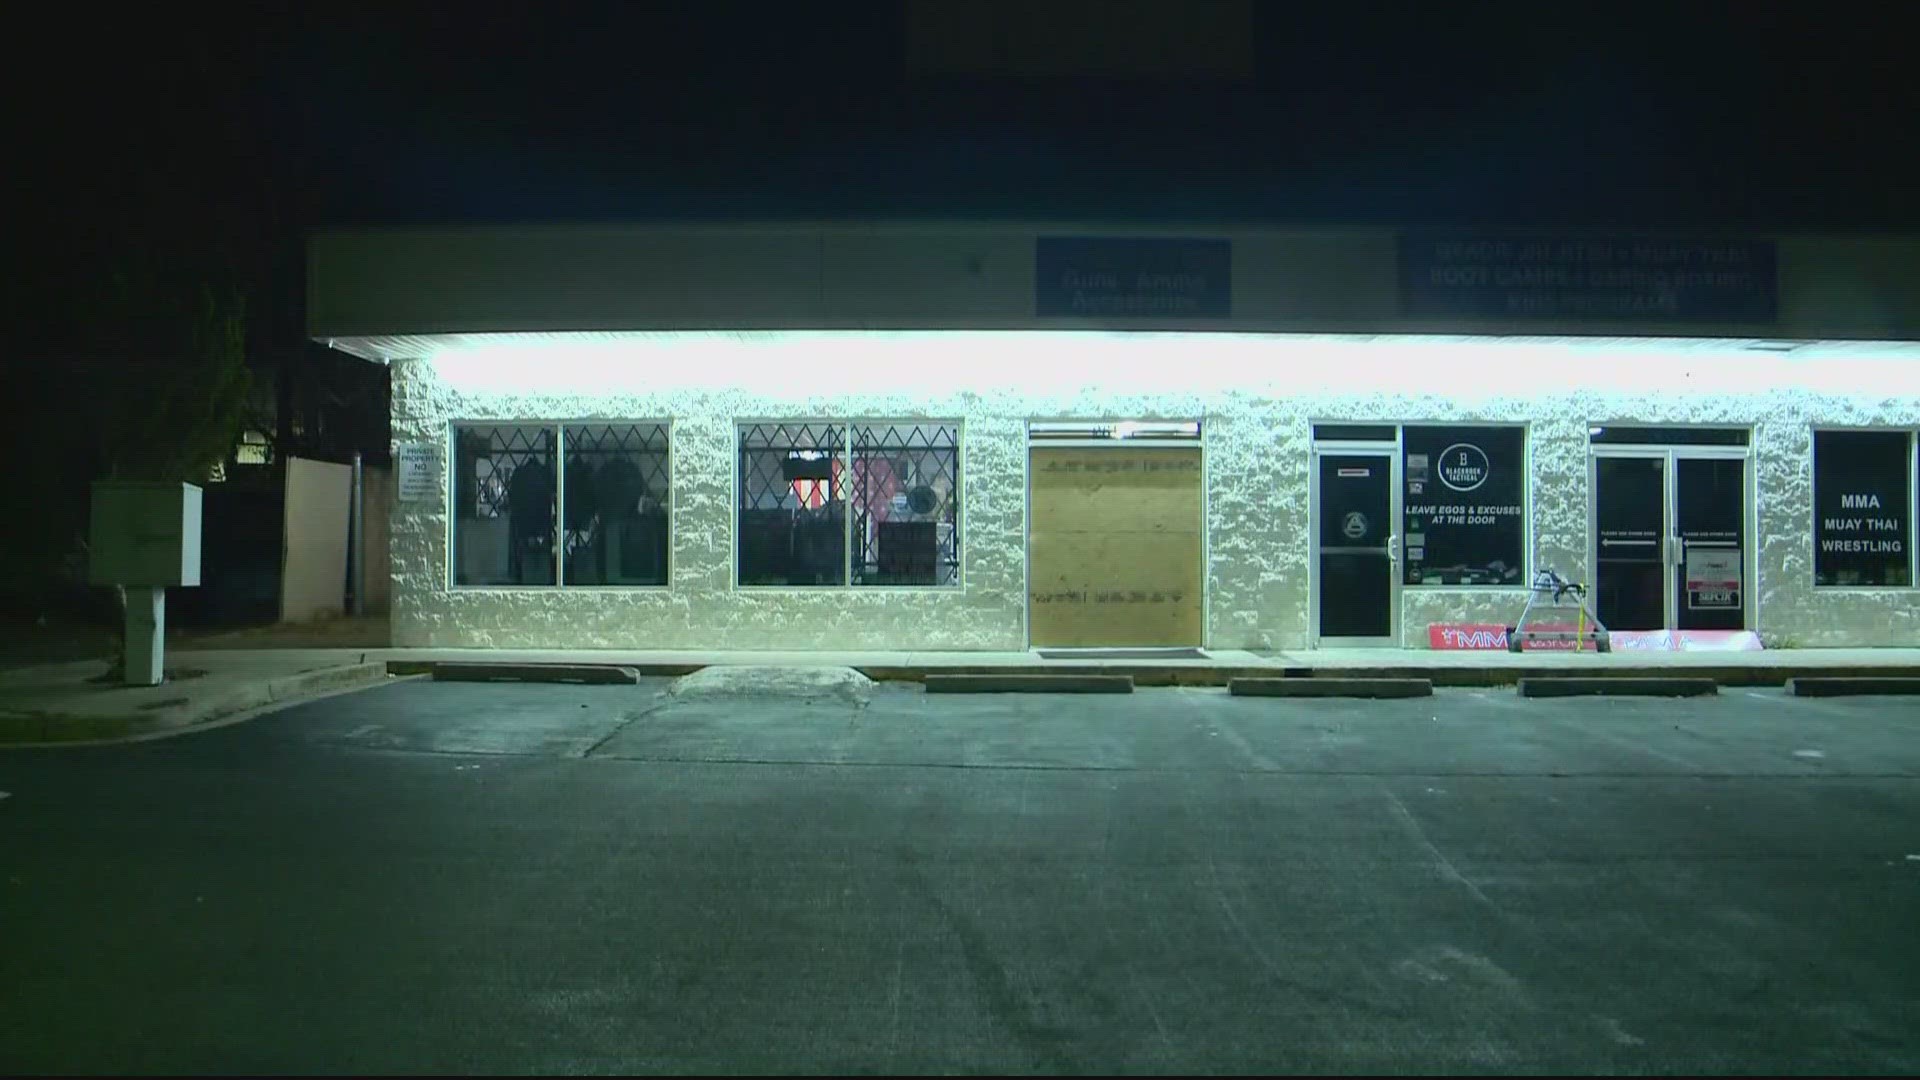 Montgomery County police are investigating a smash-and-grab robbery at AM Shooting Supply early Sunday morning.